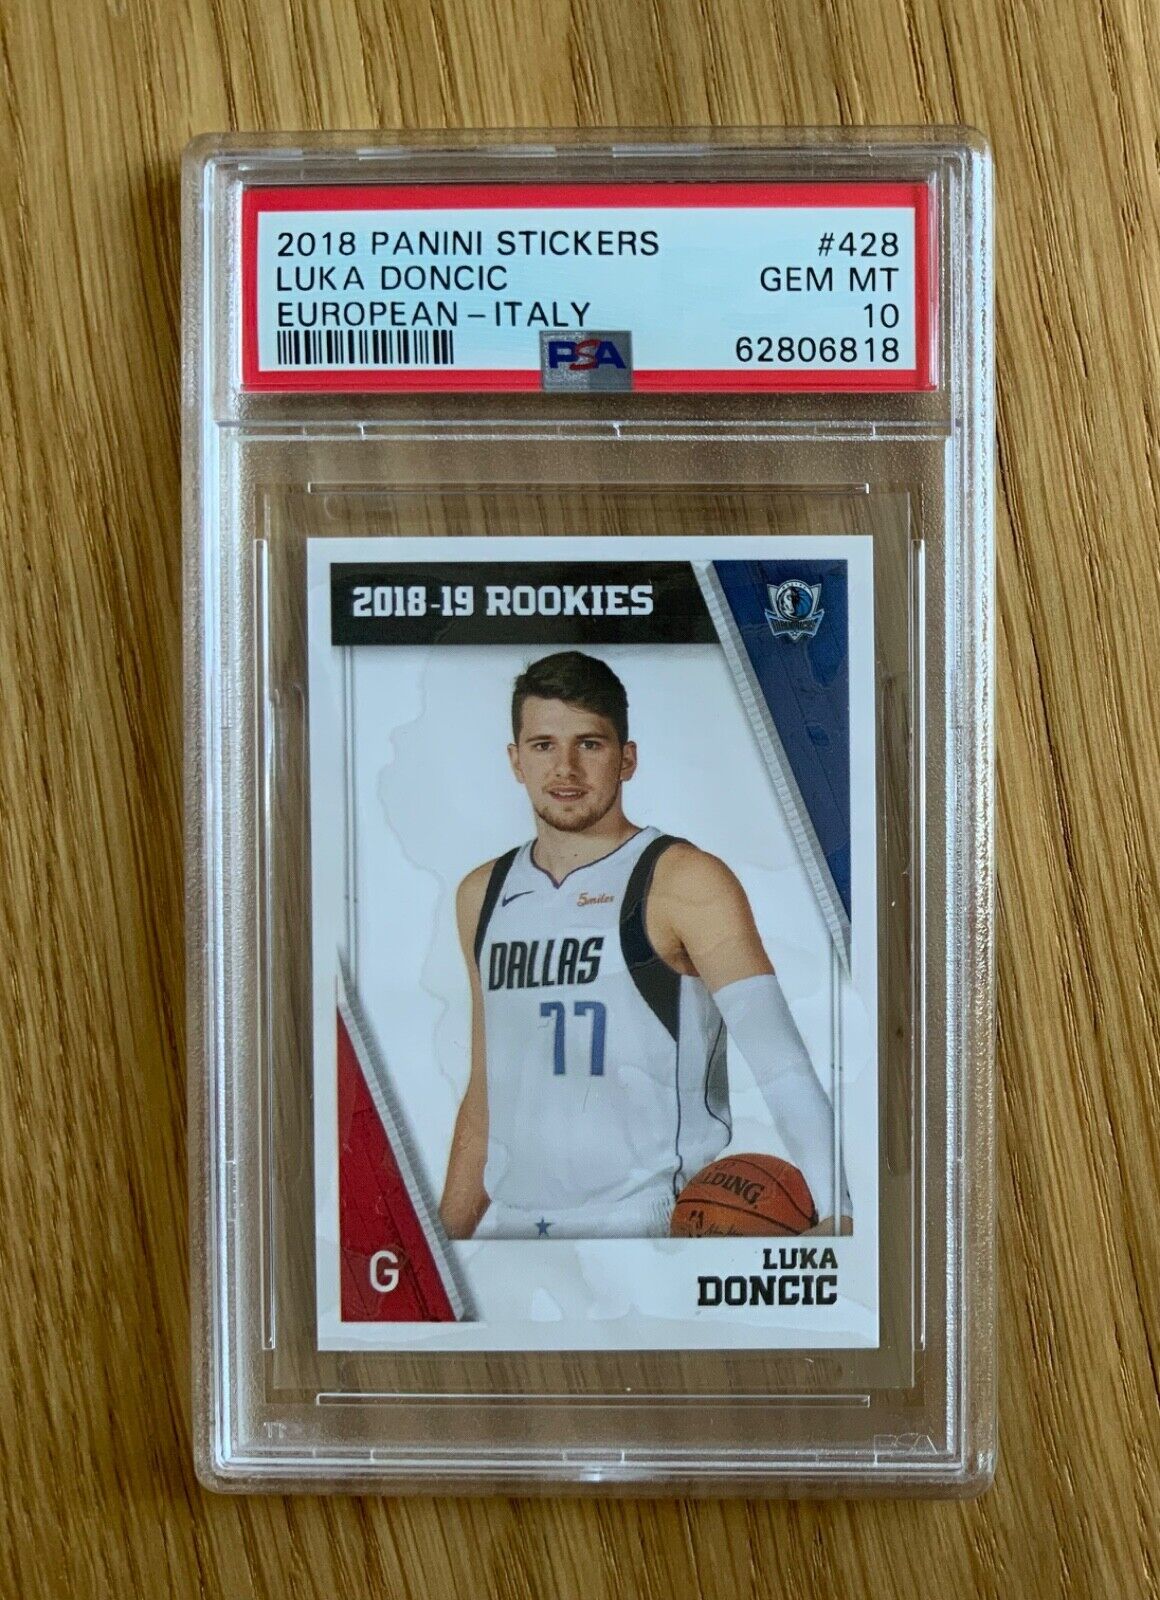 2018-2019 Panini Stickers Luka Doncic European-Italy #428 PSA 10 RC ROOKIE